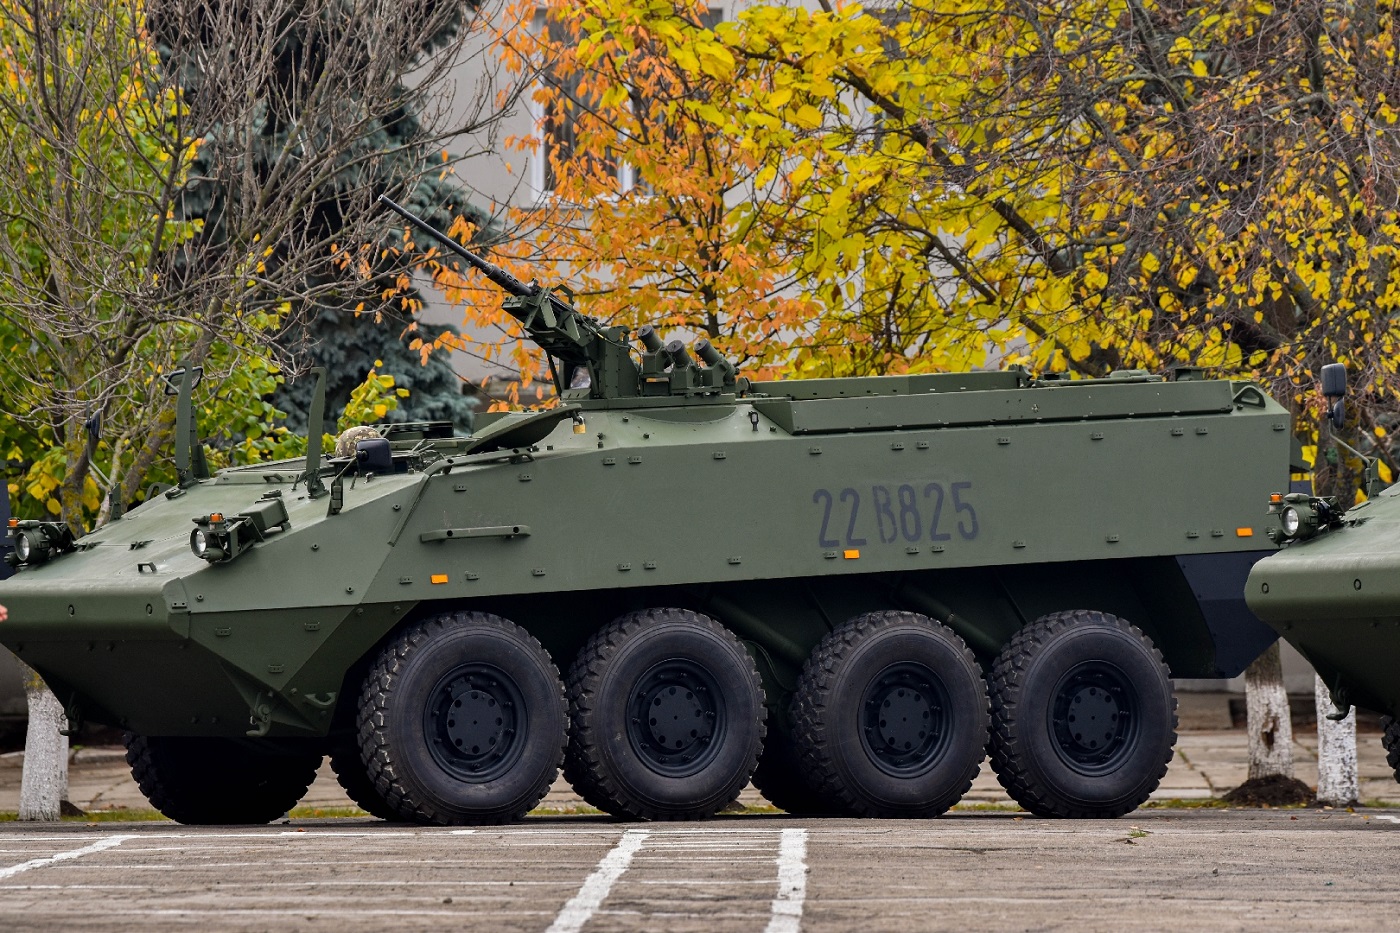 Mowag Piranha IIIH Wheeled Armored Personnel Carriers